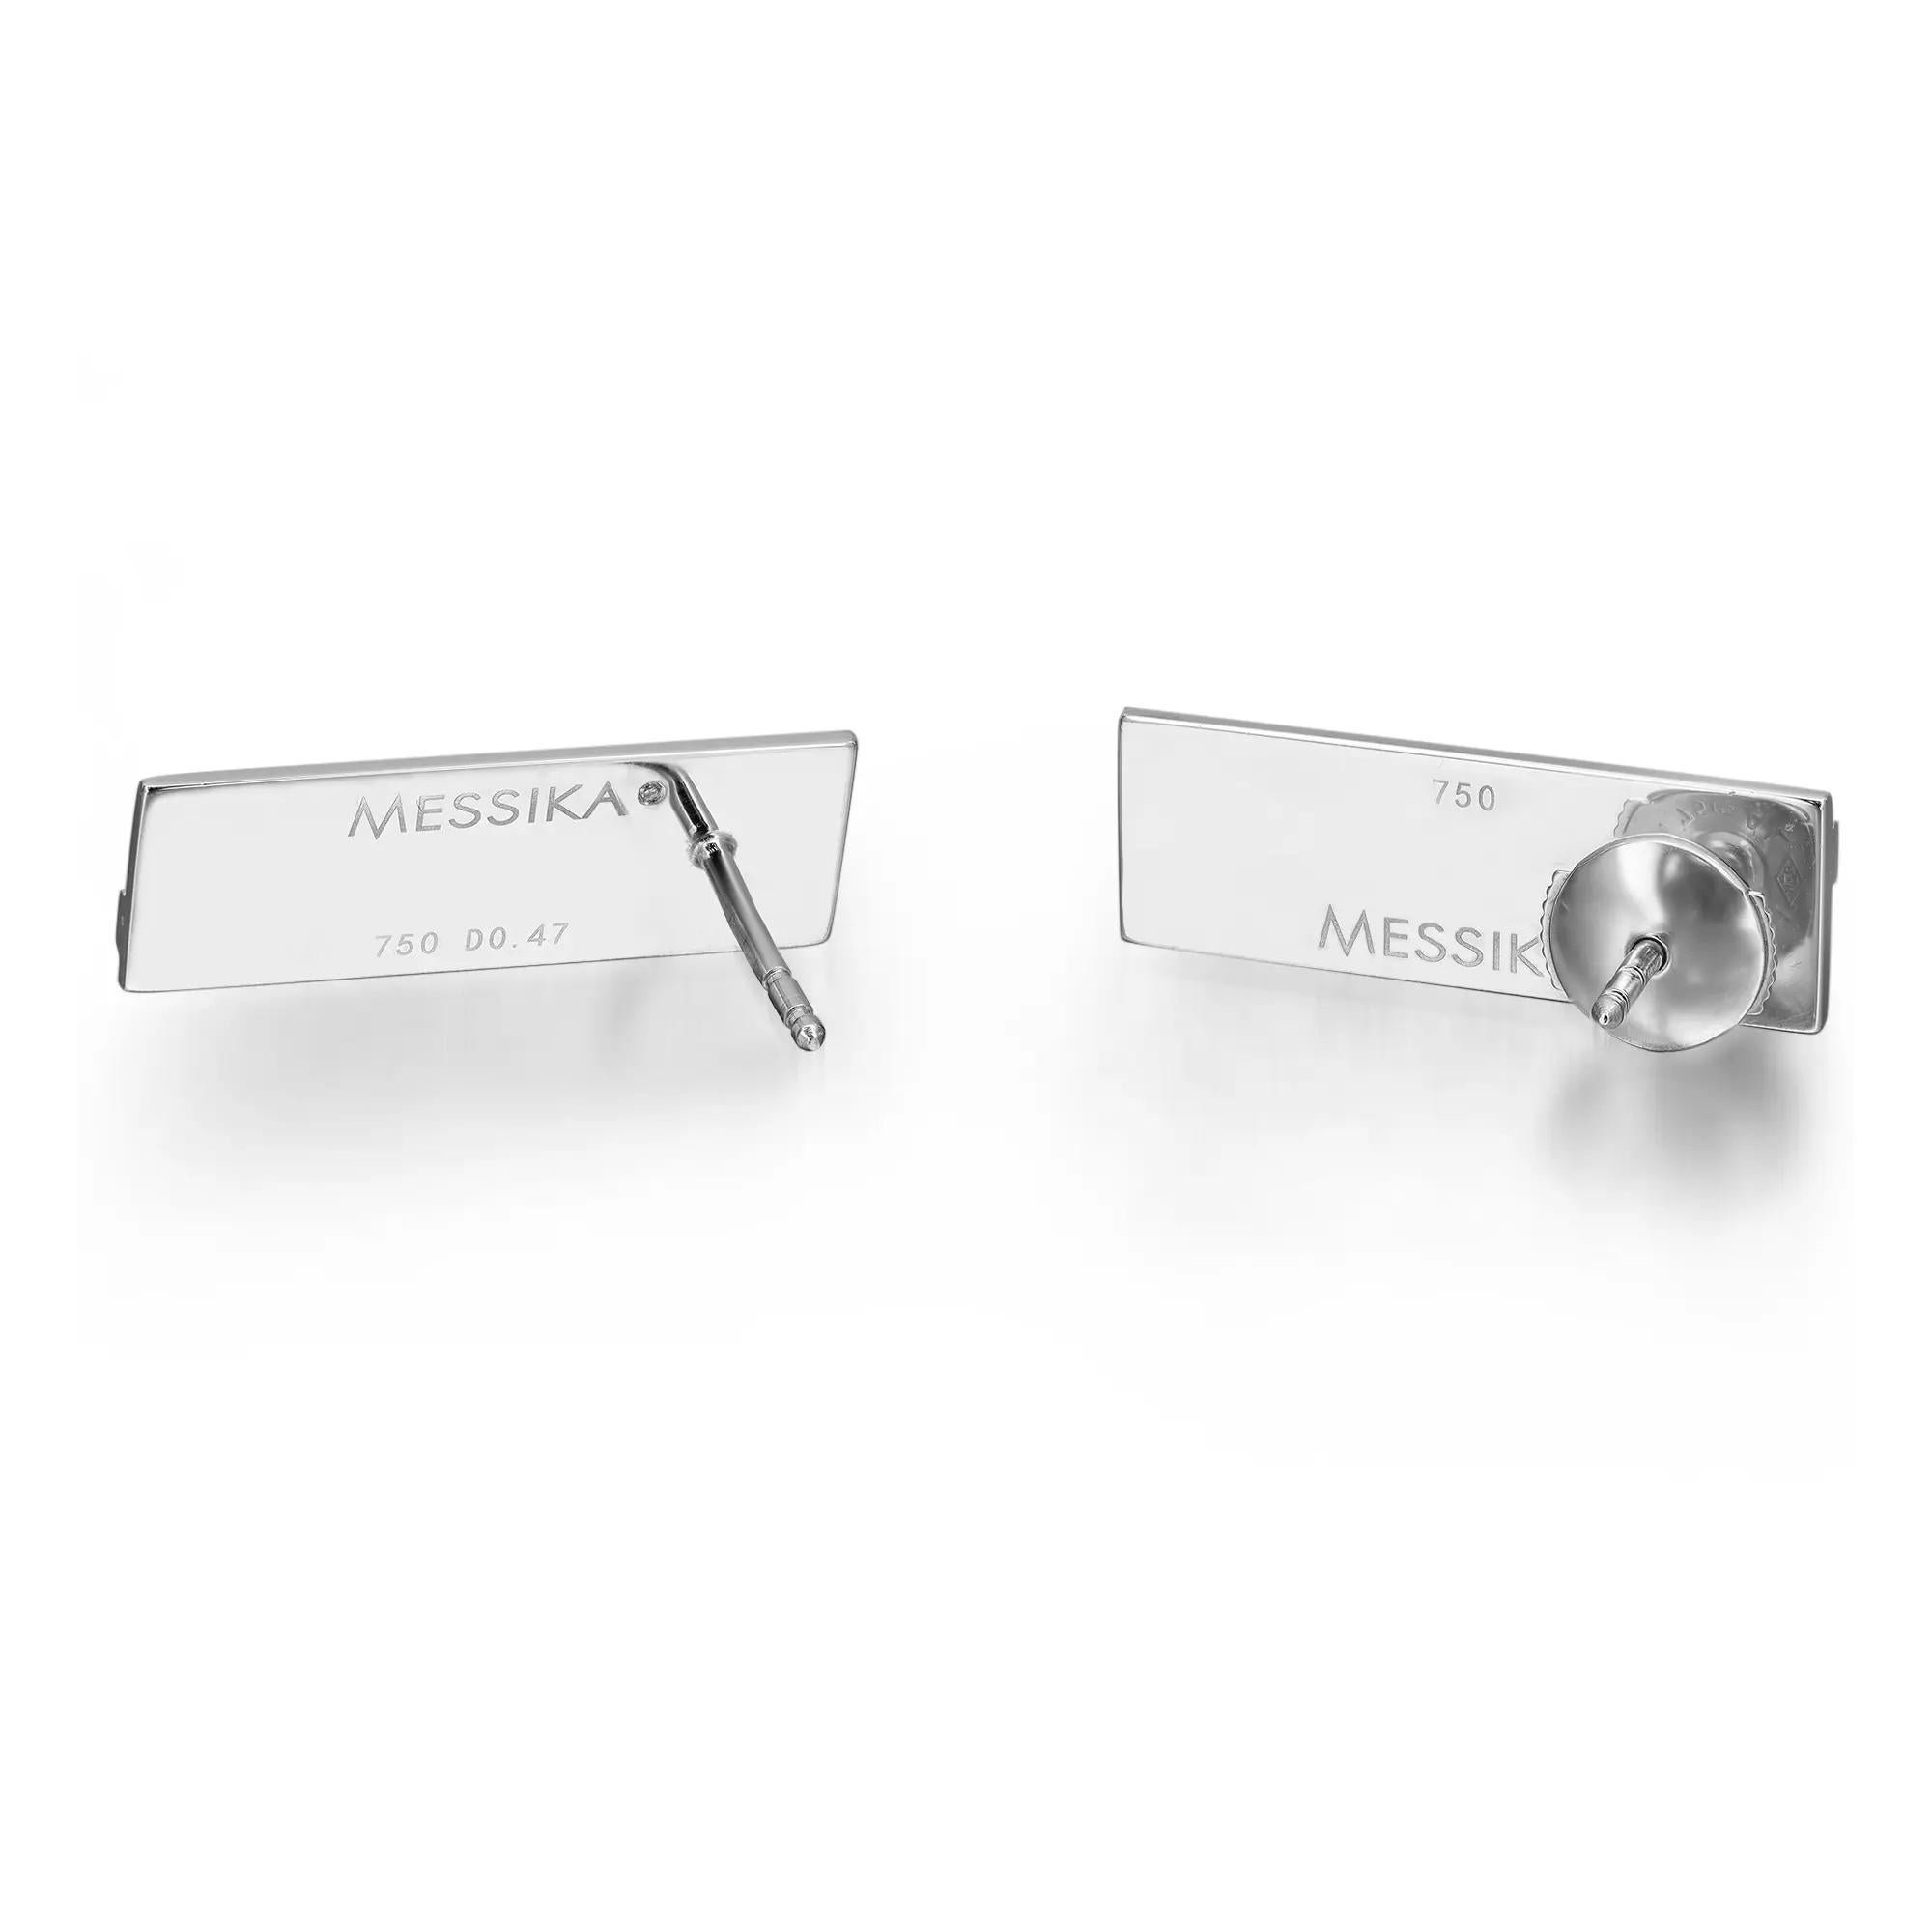 Certain to delight, this beautiful statement piece from the Messika Kate collection is perfect for day or night. Crafted in high polished 18K white gold. These vertical bar drop earrings showcase pave set round brilliant cut diamonds weighing 0.47